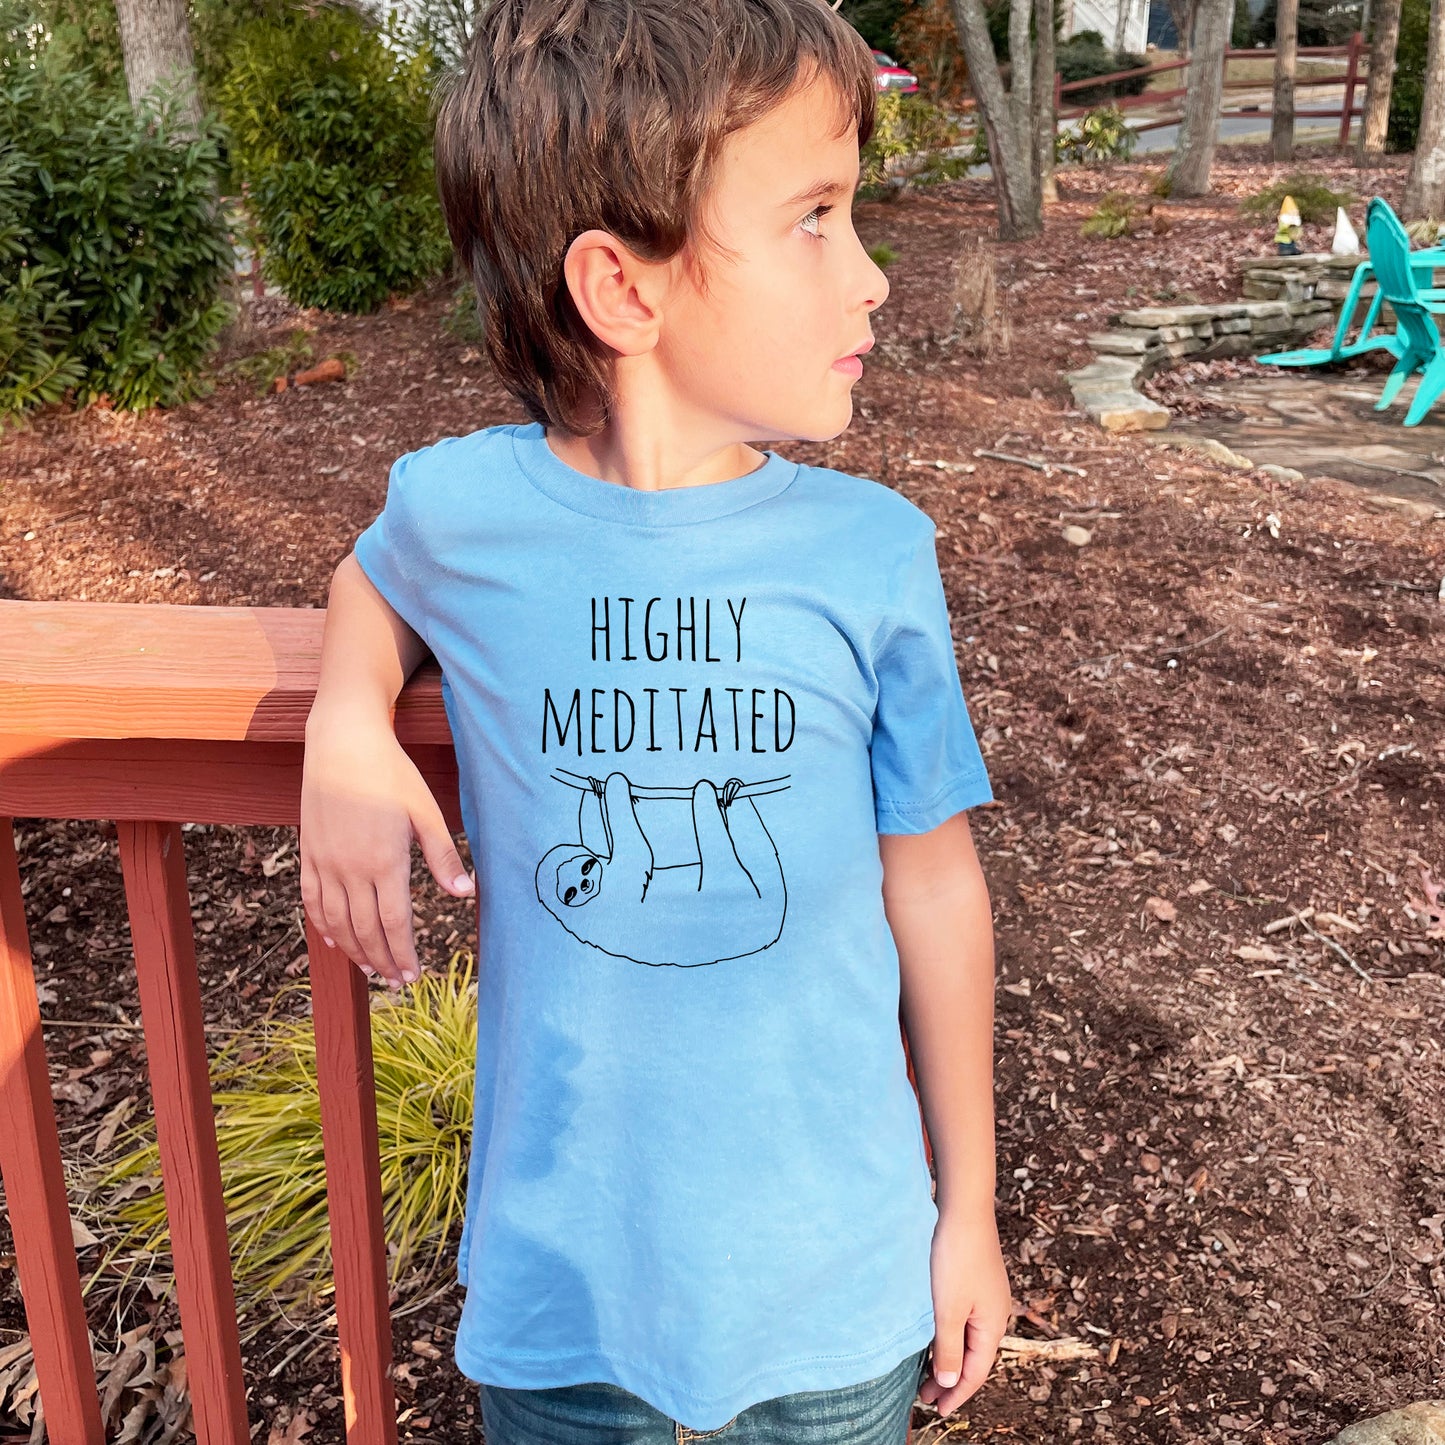 Highly Meditated (Sloth) - Kid's Tee - Columbia Blue or Lavender